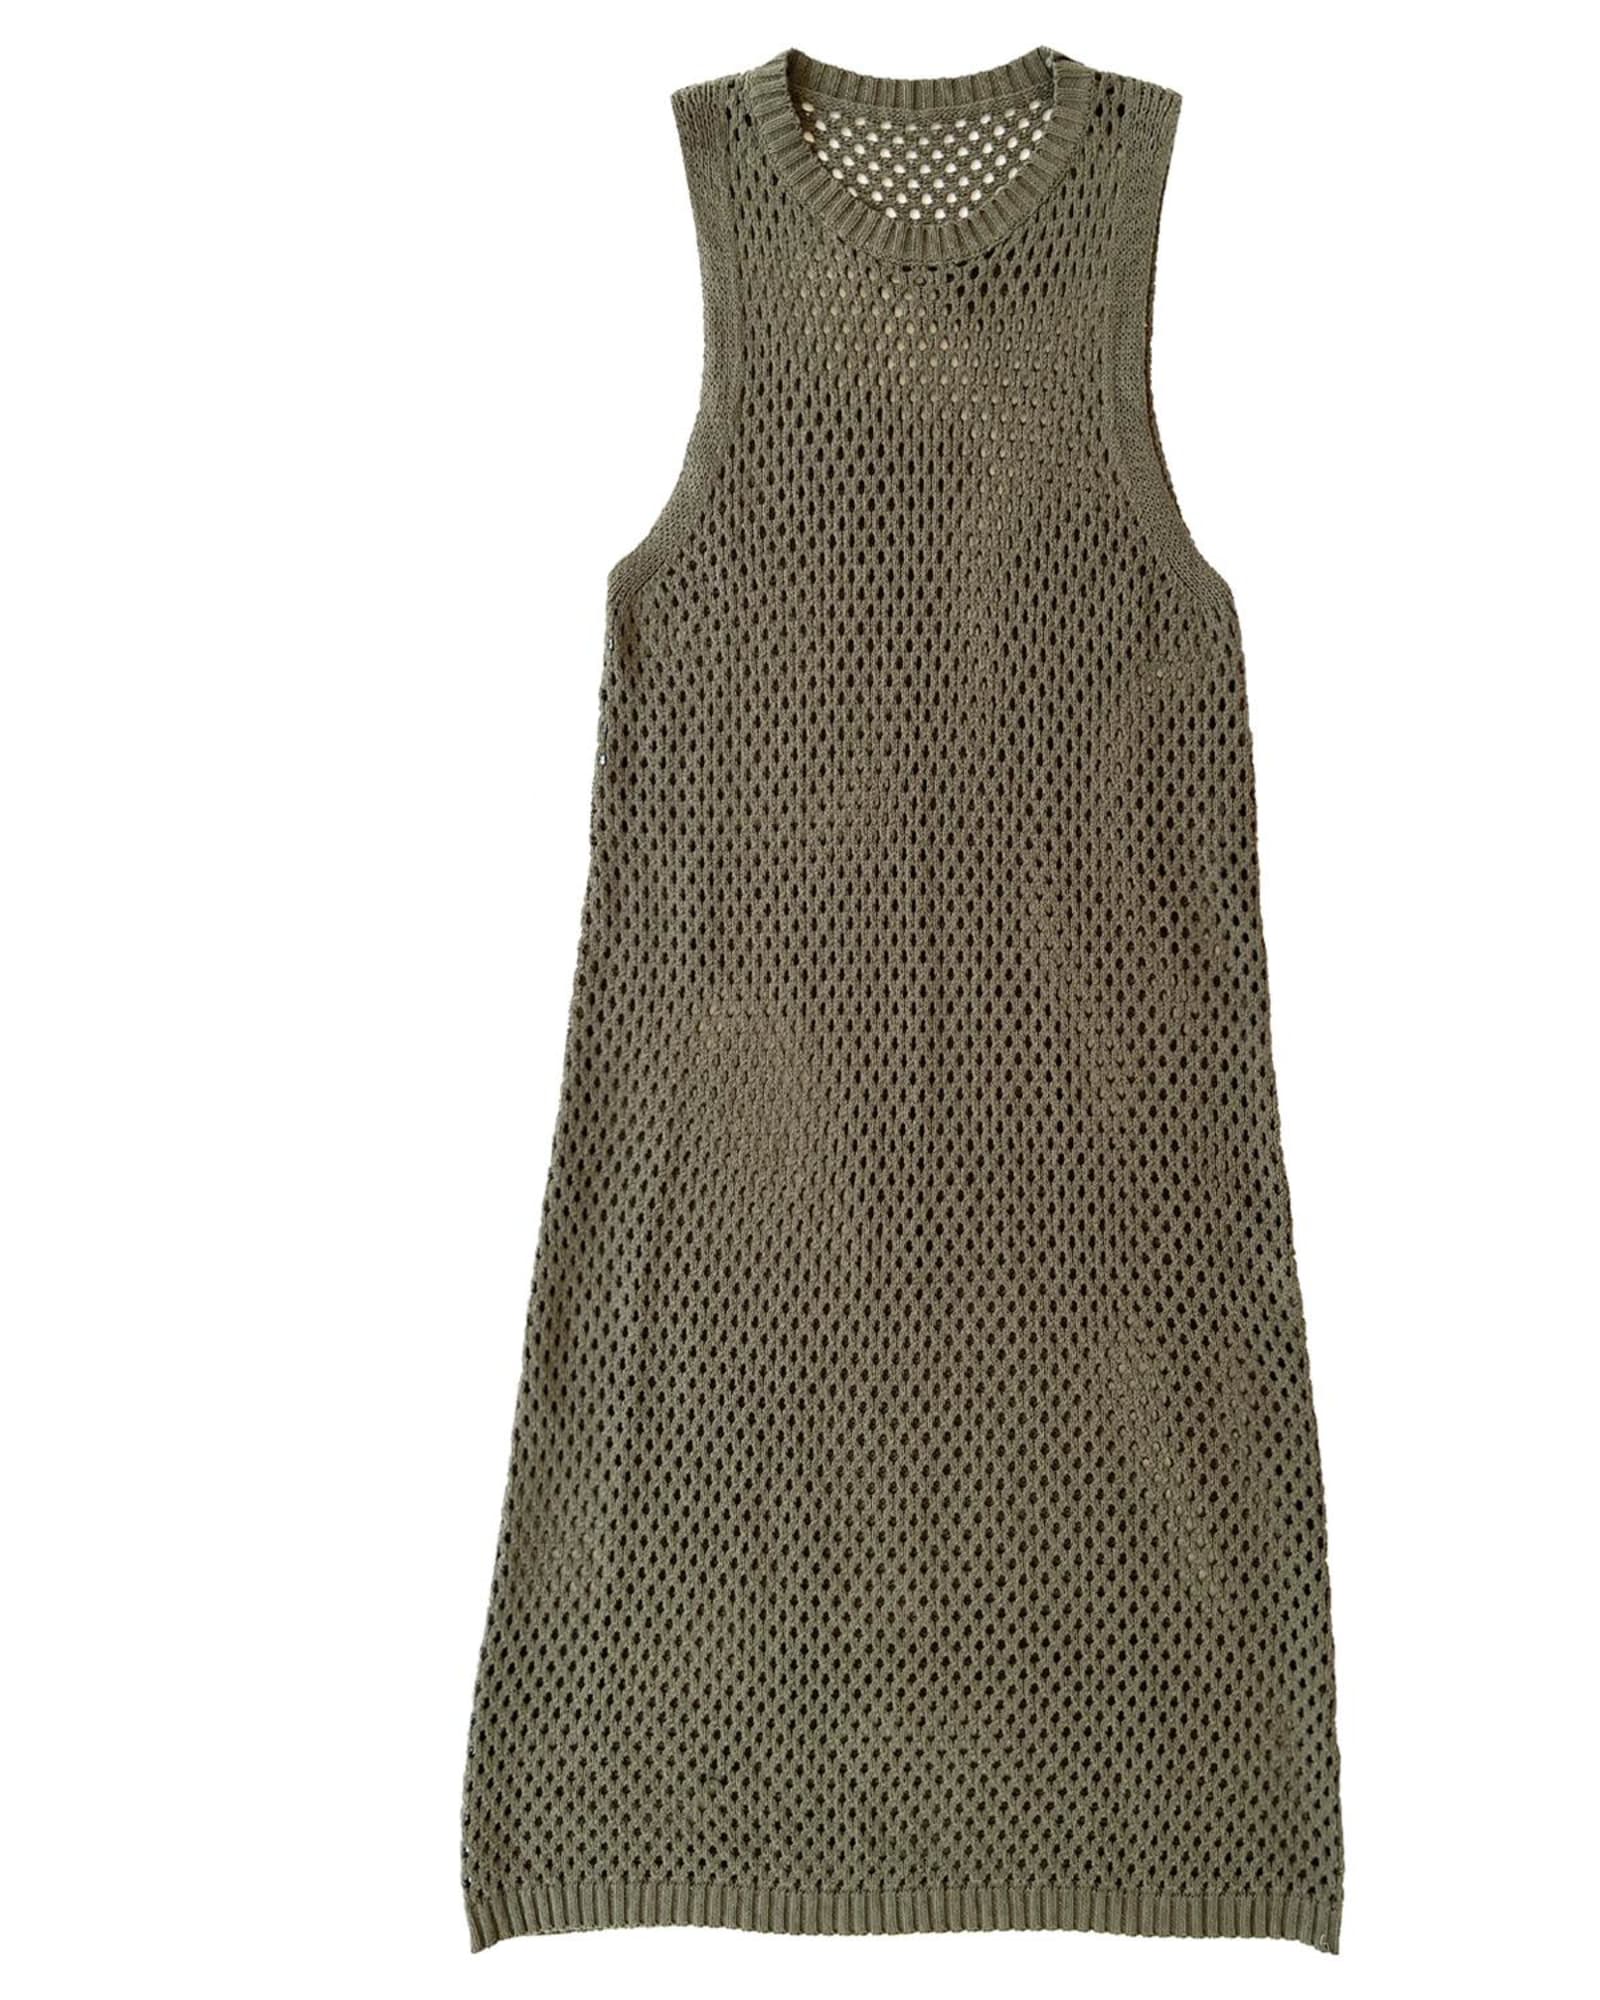 Open Knit Dress in Olive | Olive